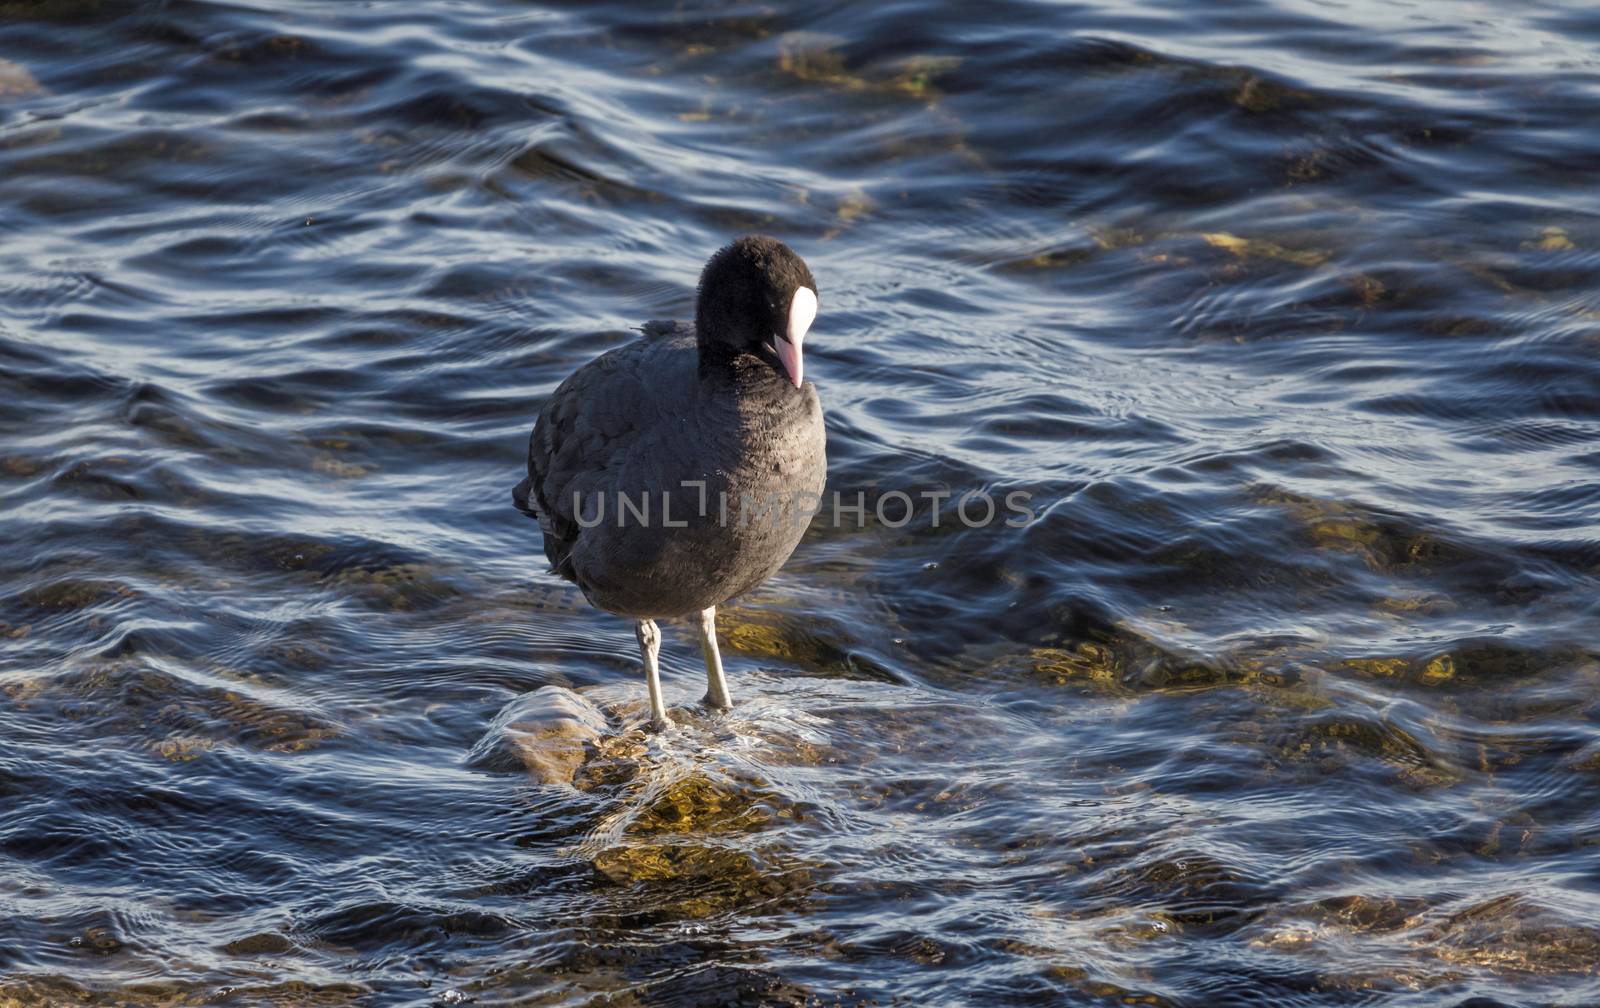 common moorhen bird standing on a stone in the water